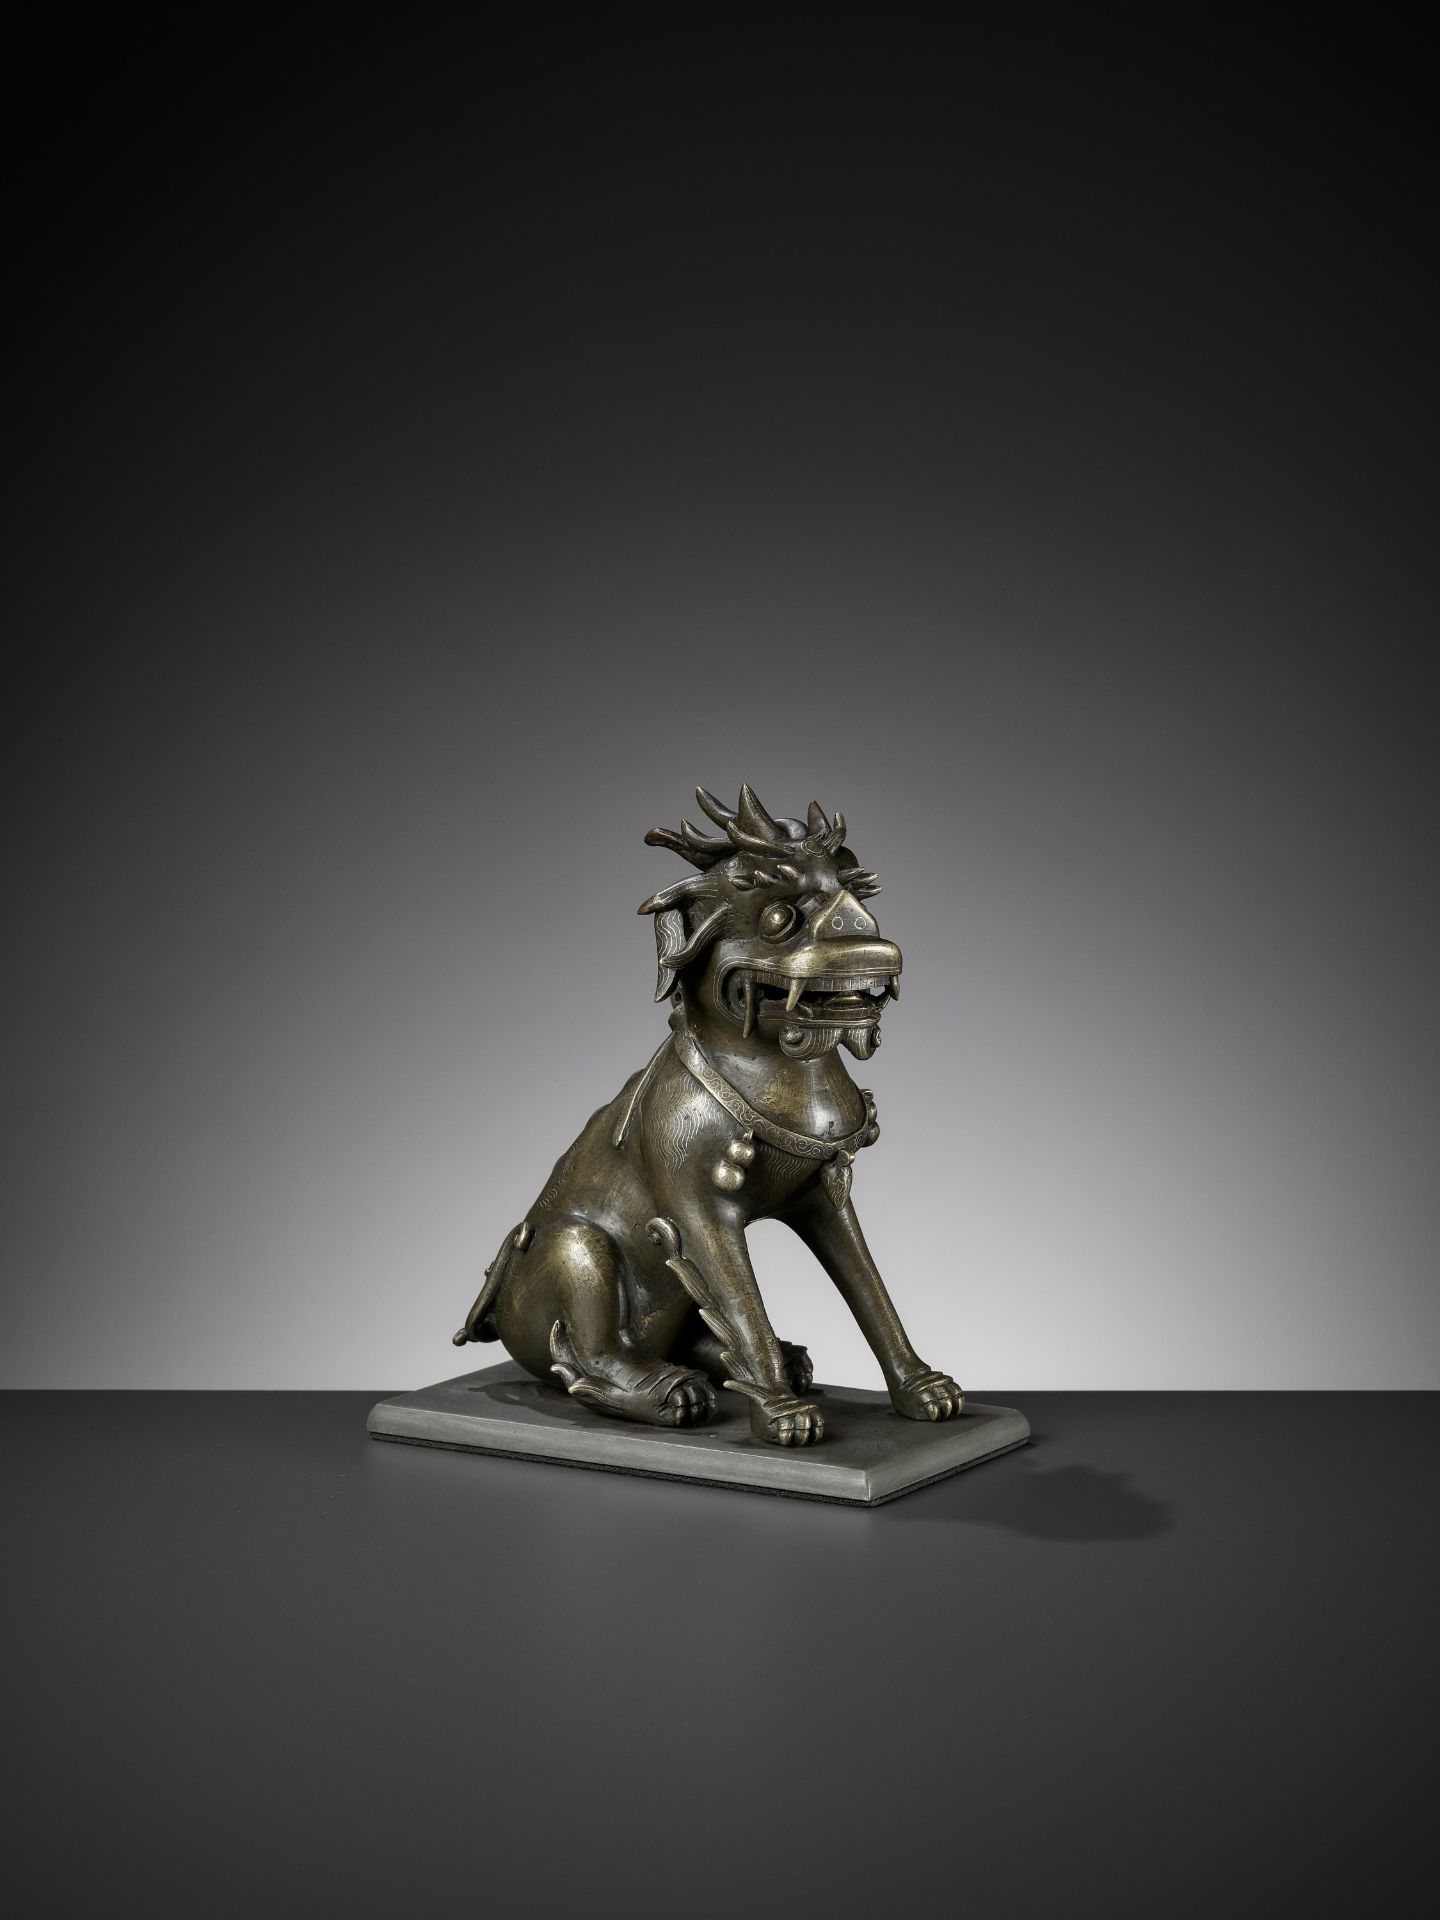 A SILVER WIRE-INLAID BRONZE FIGURE OF A QILIN, ATTRIBUTED TO SHISOU, QING DYNASTY - Image 2 of 12